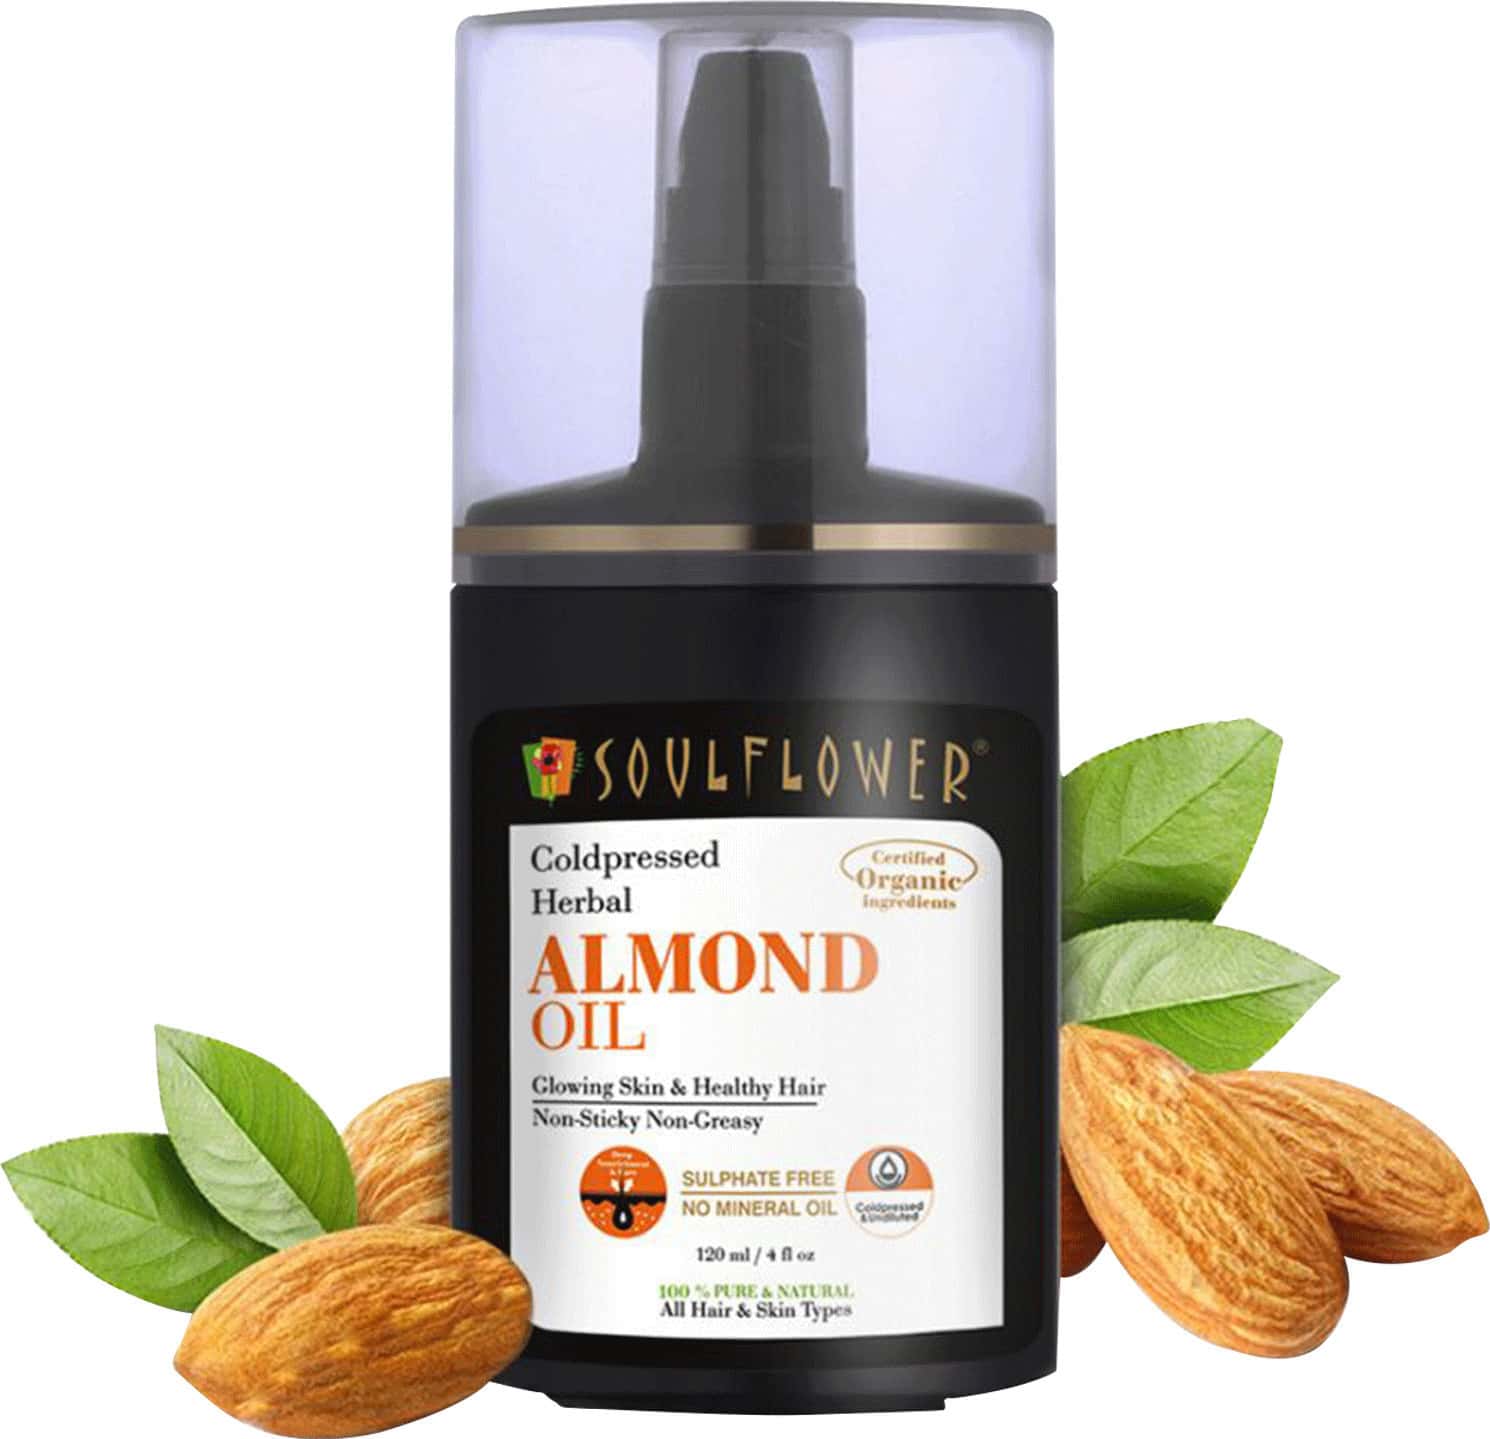 Soulflower Almond Oil For Glowing Skin & Healthy Hair 100% Pure Natural Coldpressed Herbal 120ml